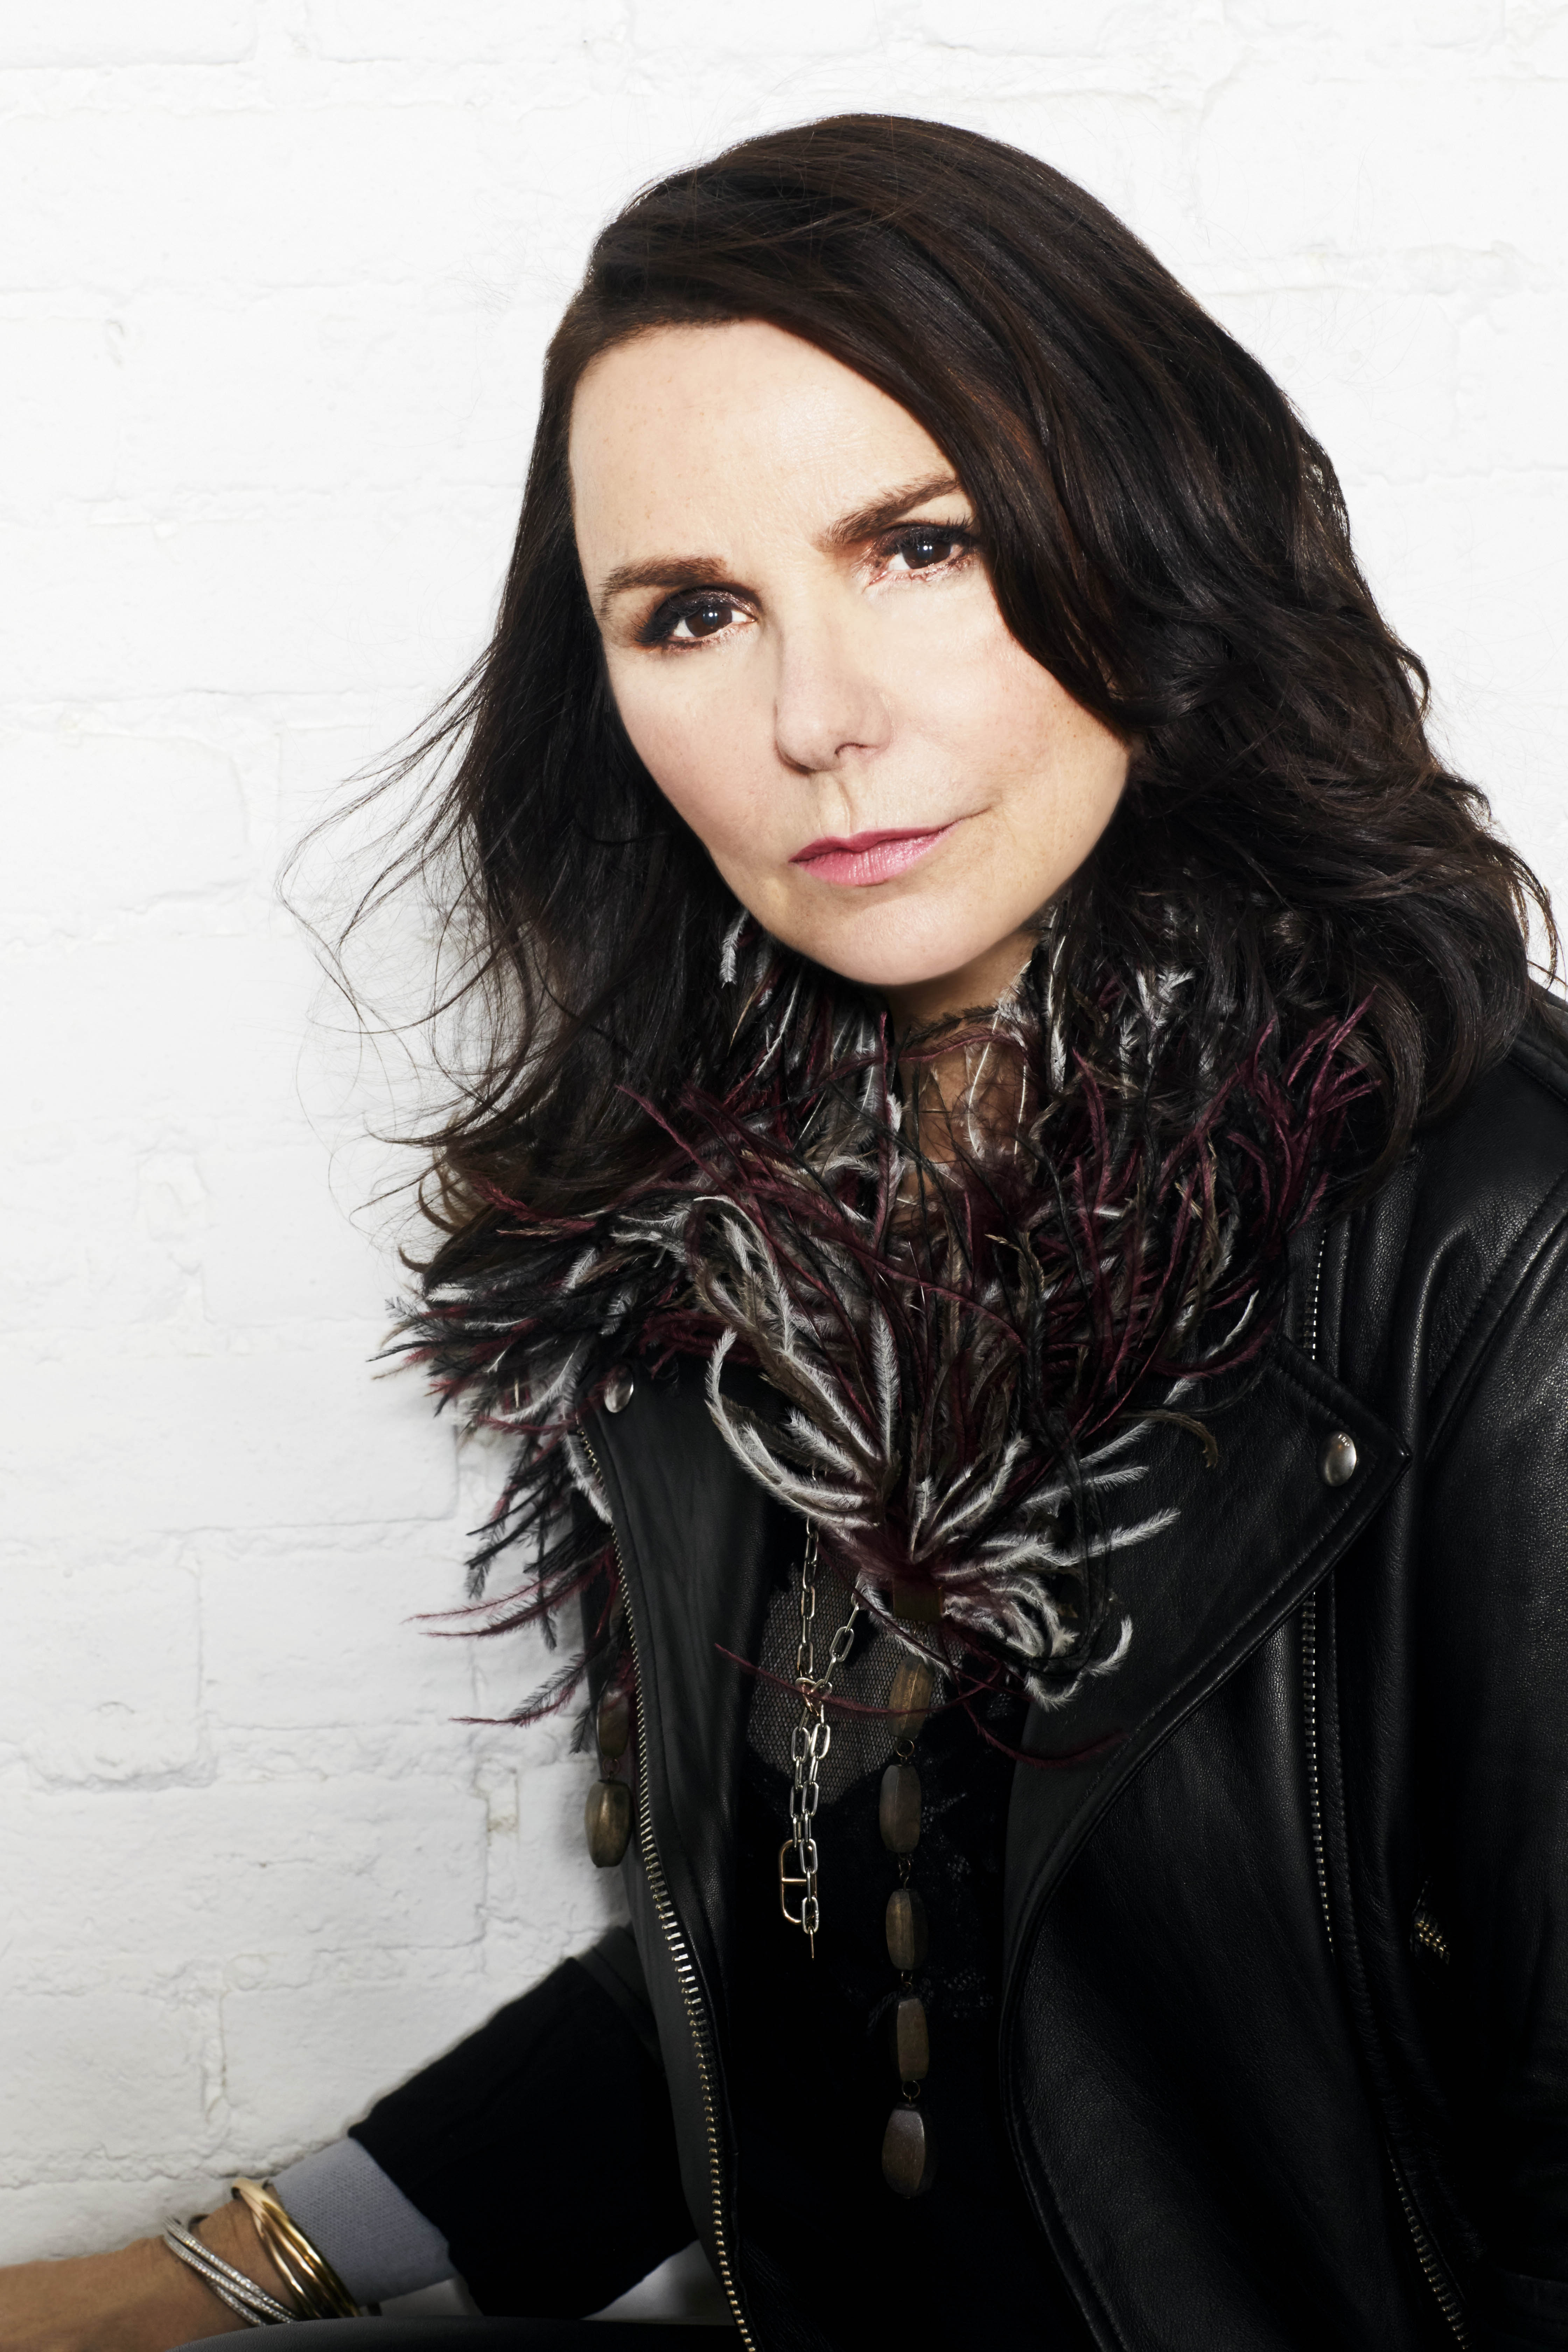 Patty Smyth Talks Doing the Theme Song for a Show She's Never Watched